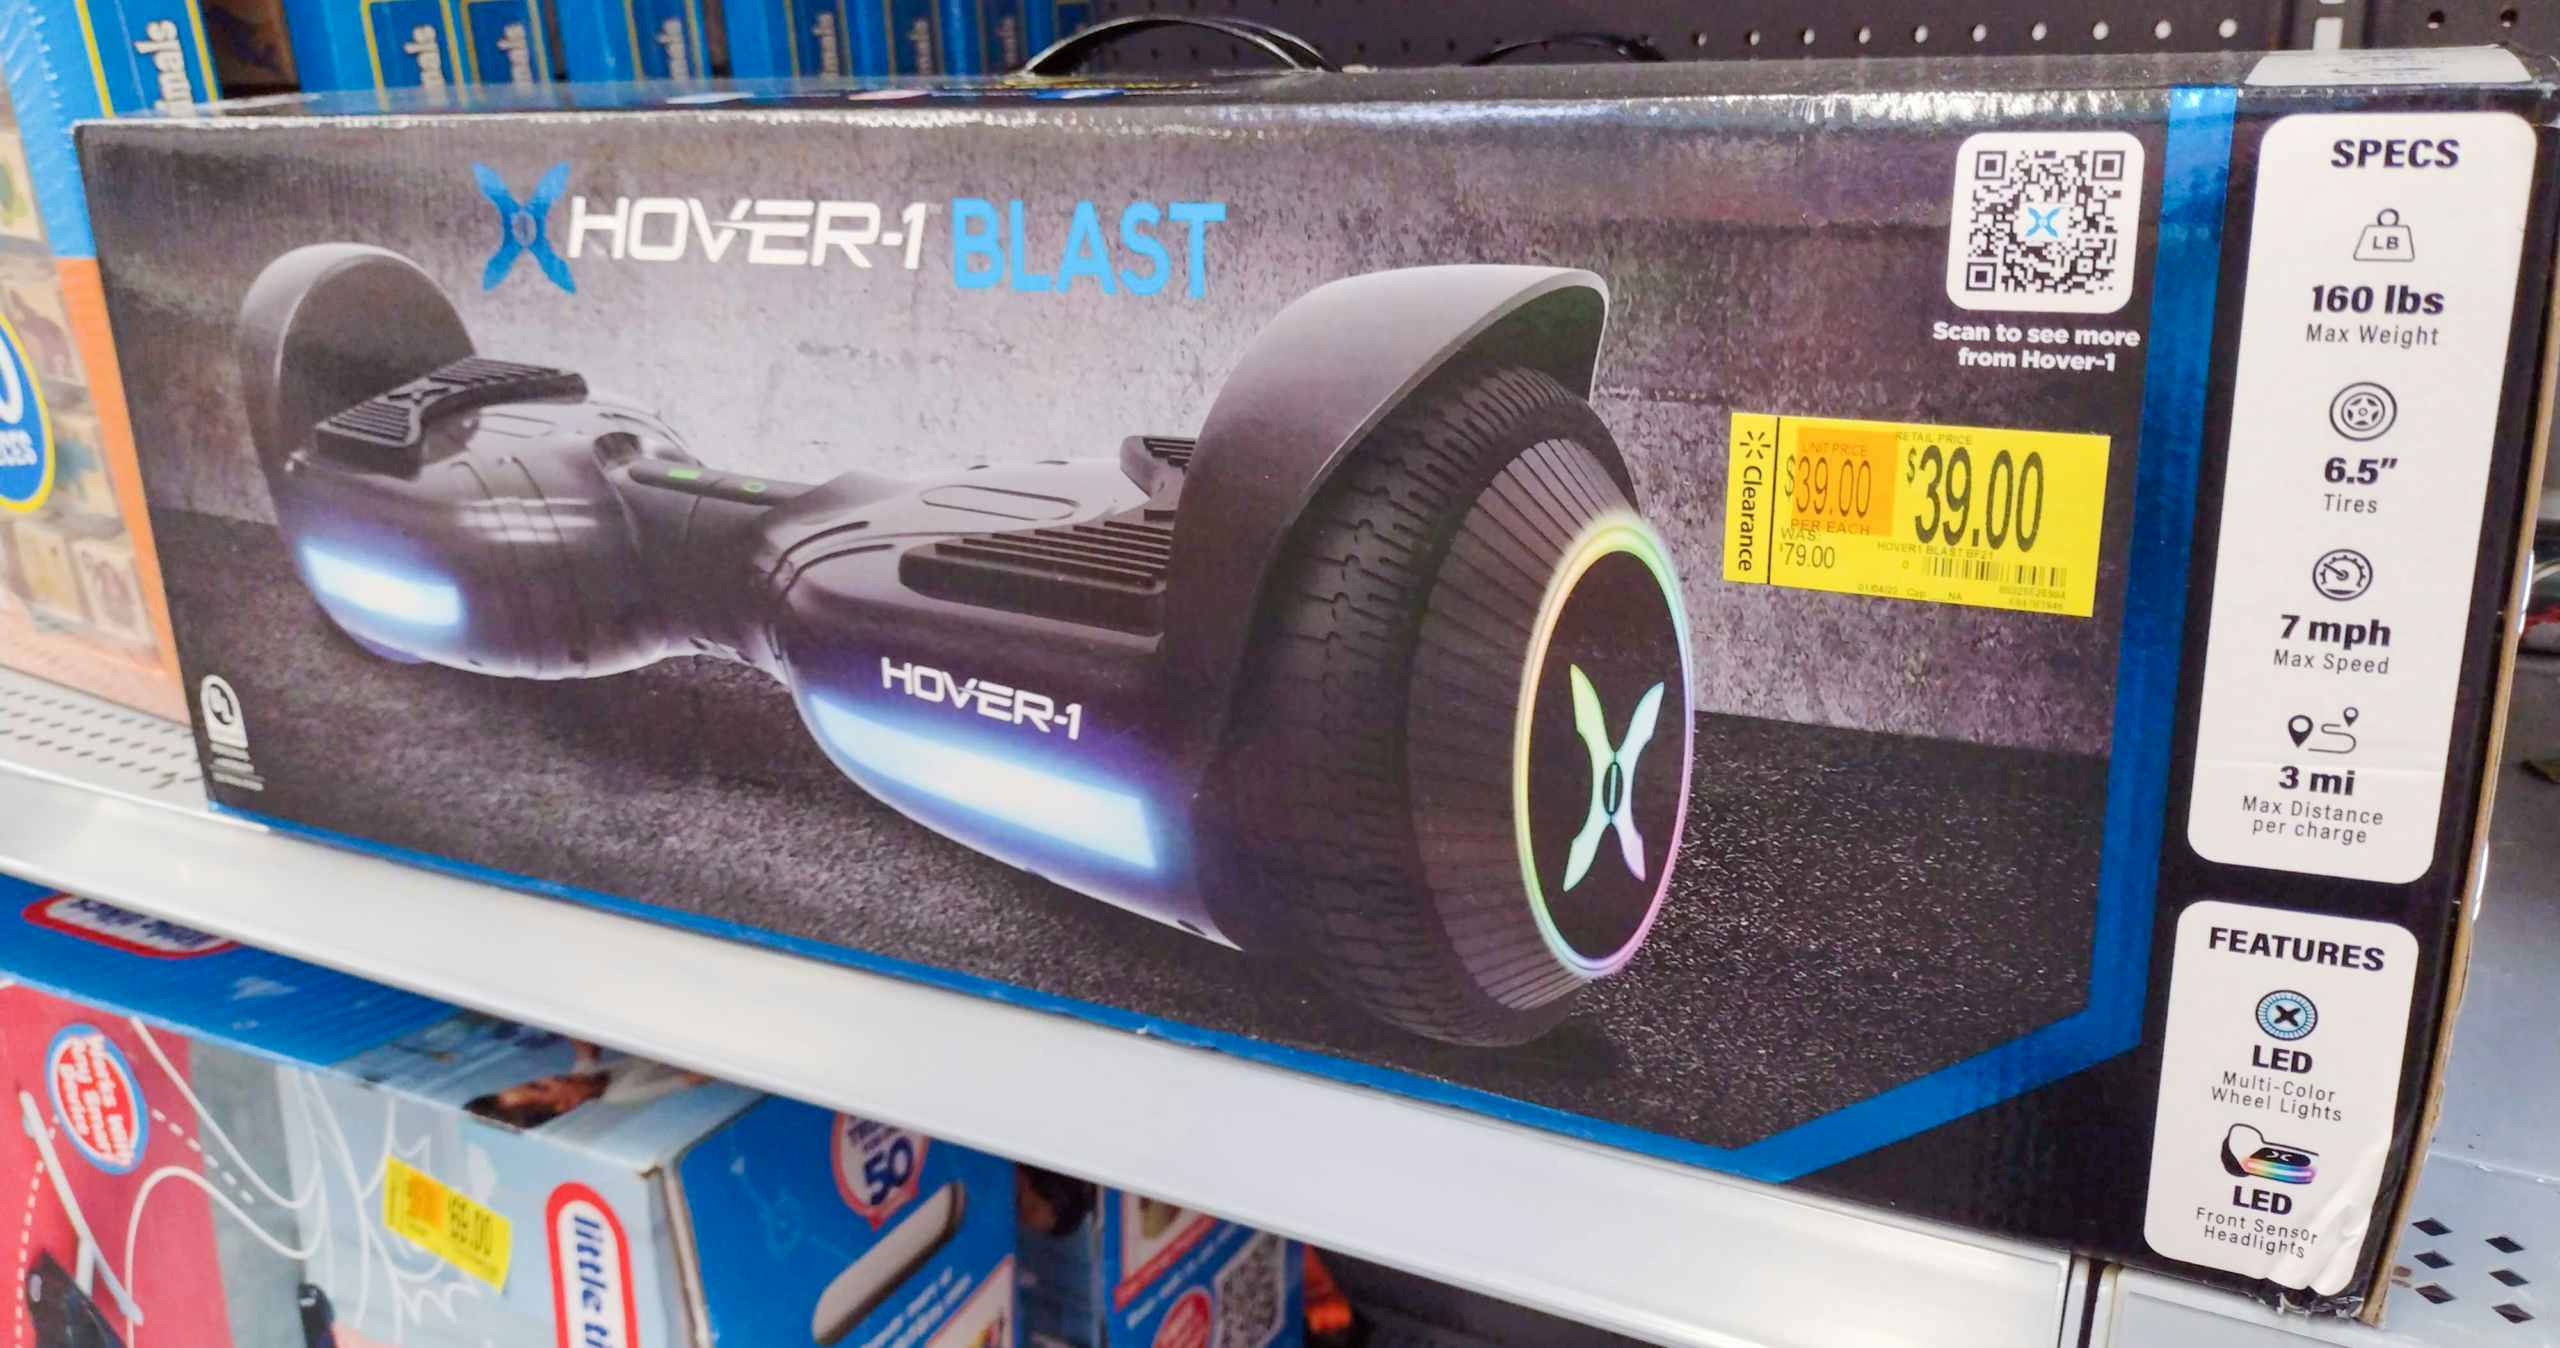 Hover-1 Blast Hoverboard Clearance at Walmart